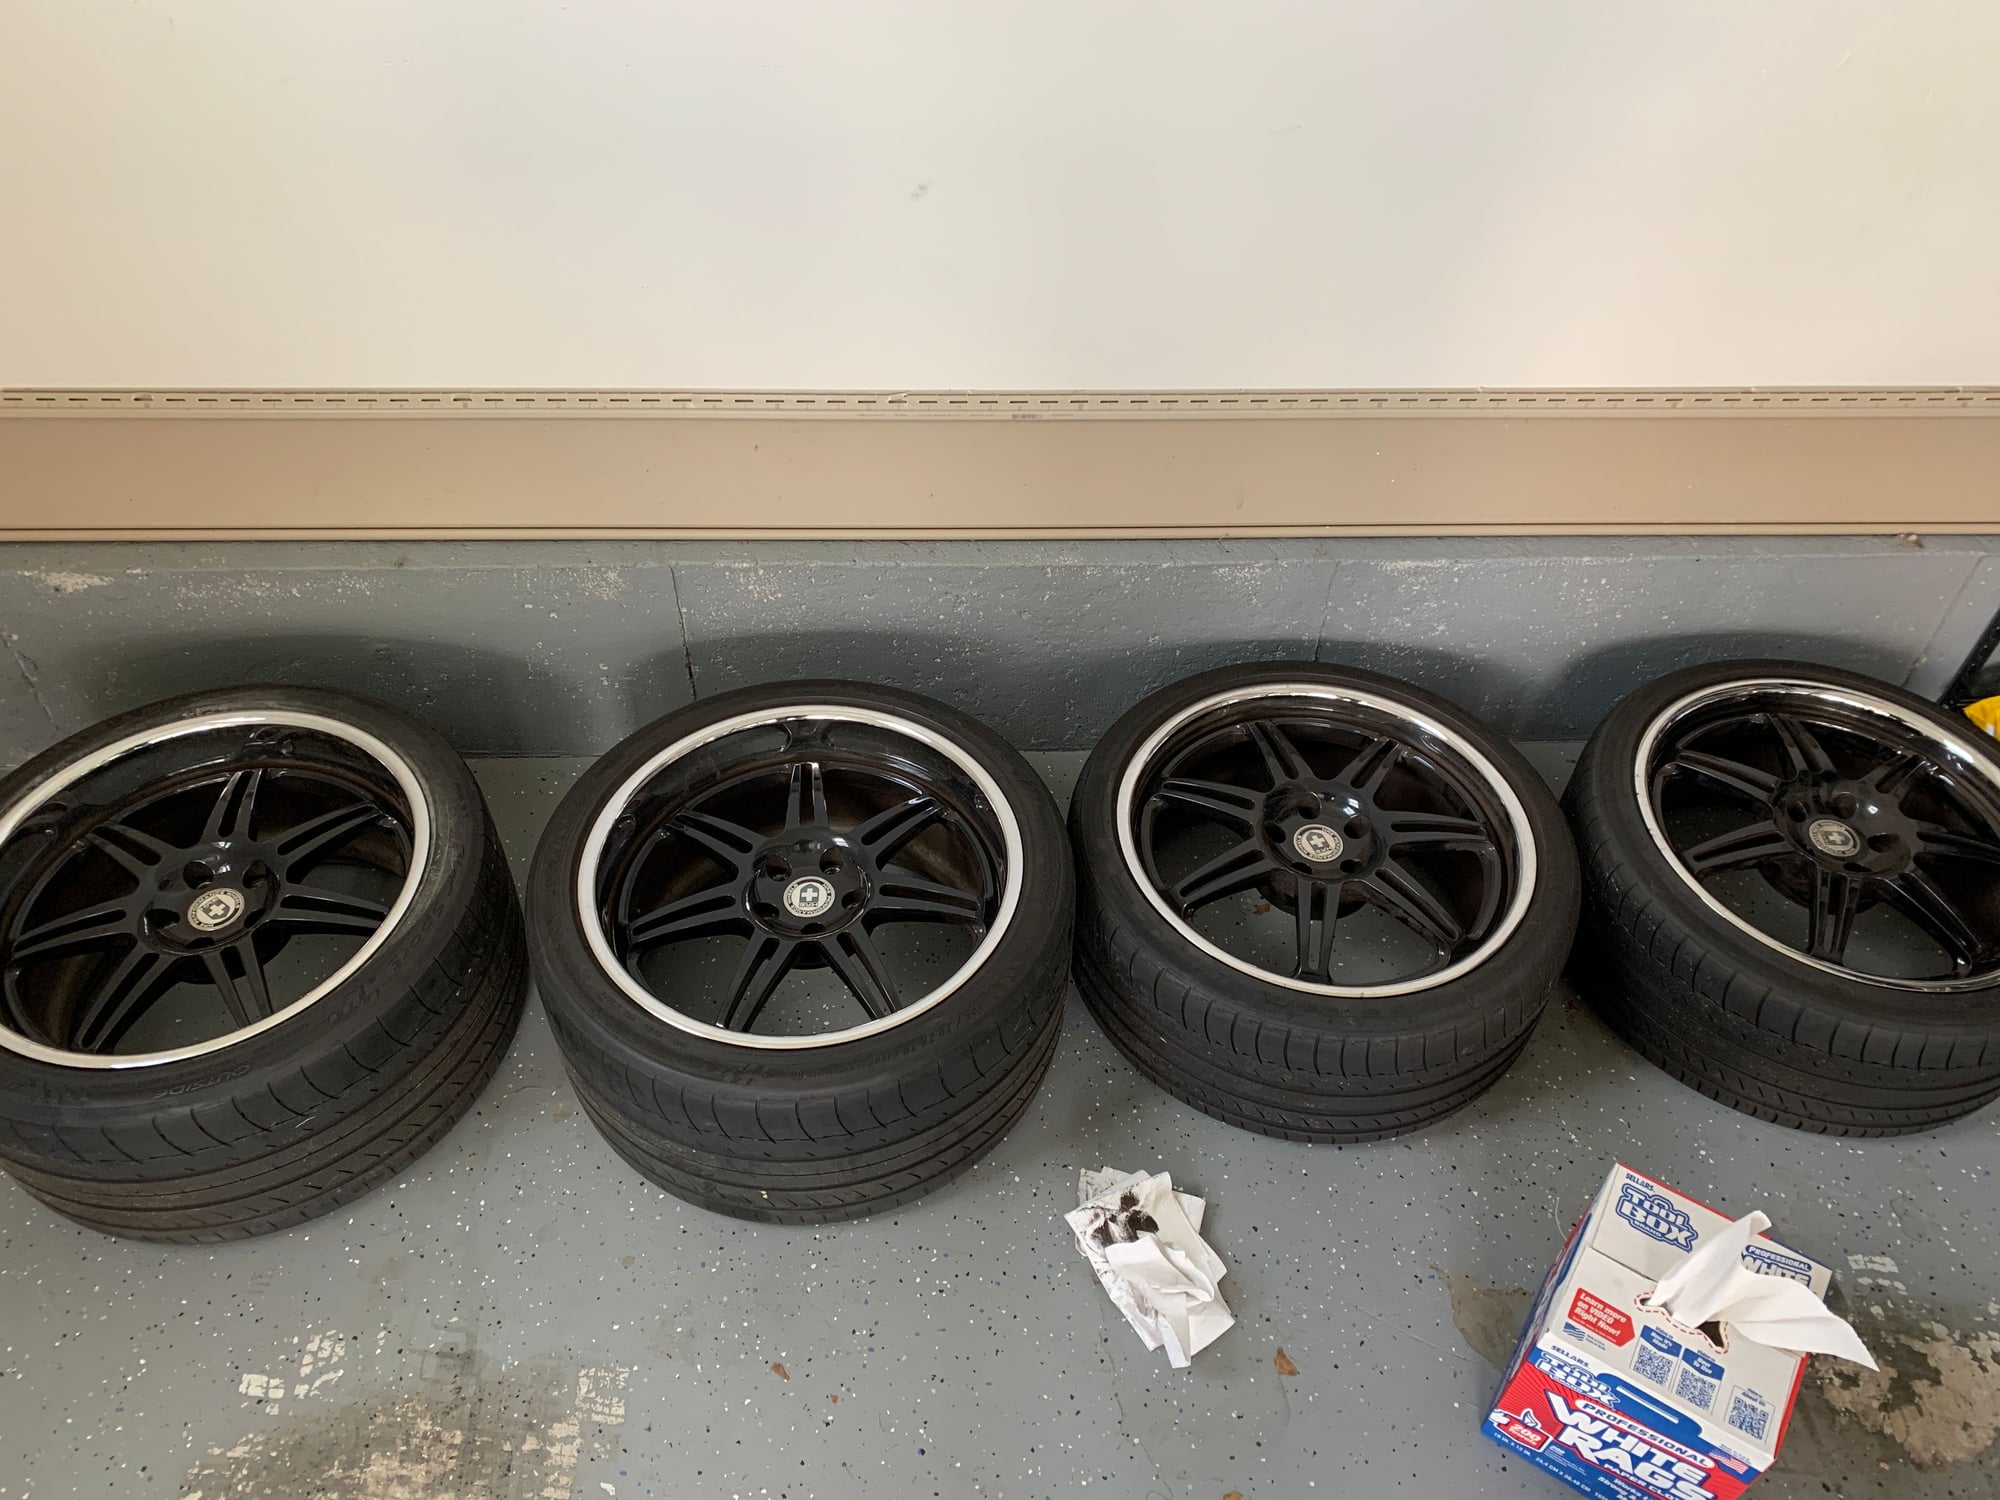 Wheels and Tires/Axles - Used 19" HRE 891R w/Michelin Pilot Sports - Used - 2004 Mercedes-Benz SL65 AMG - Philadelphia, PA 19426, United States